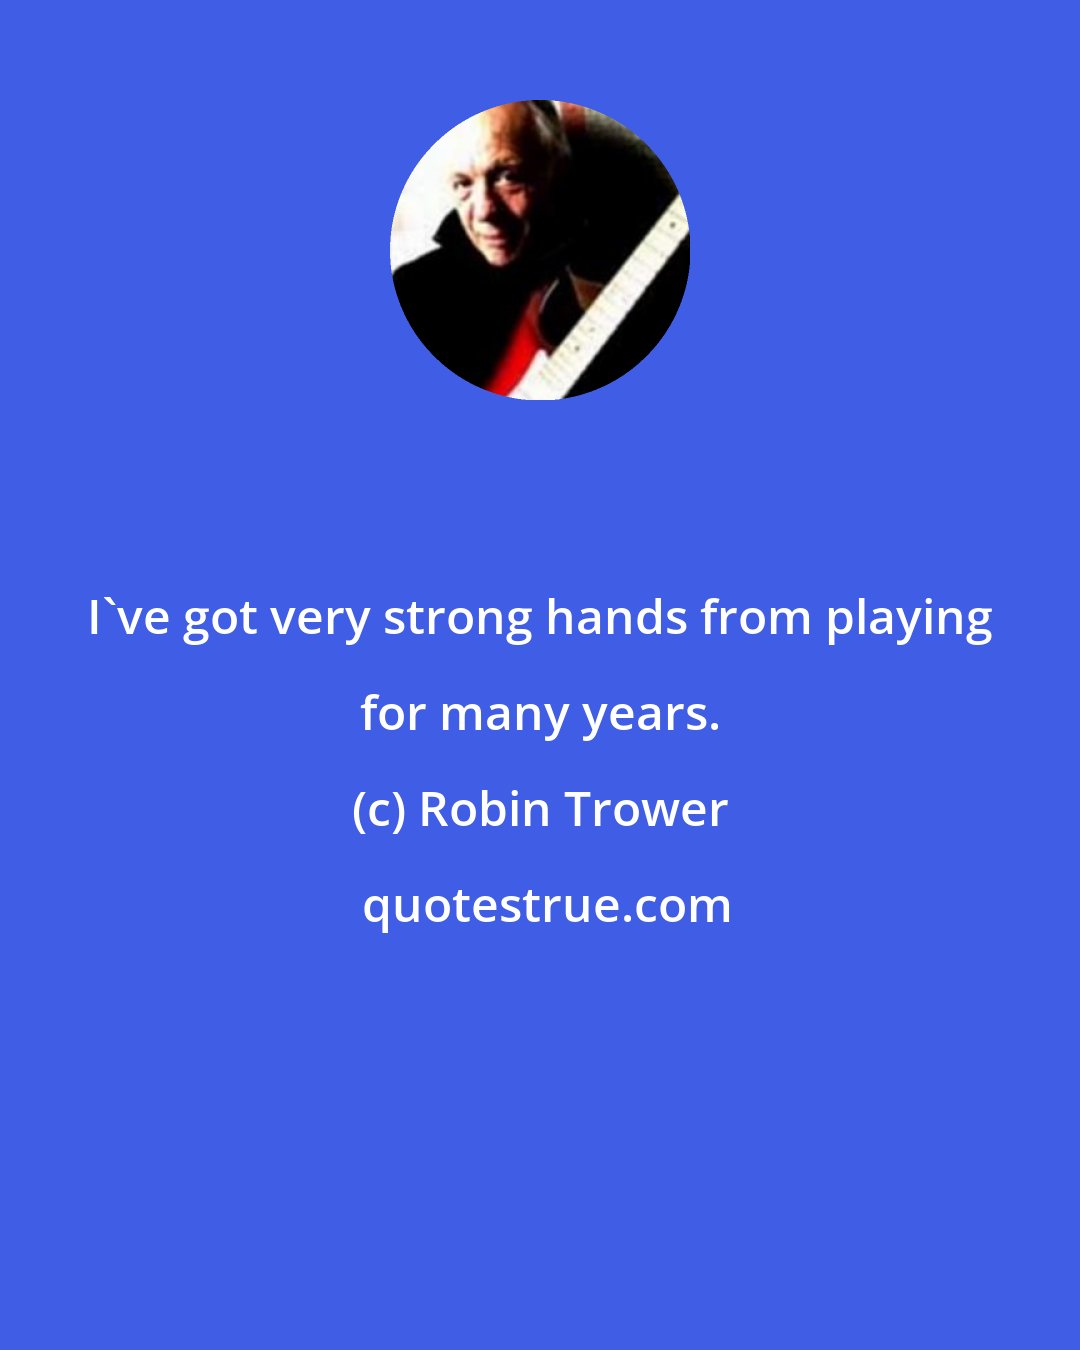 Robin Trower: I've got very strong hands from playing for many years.